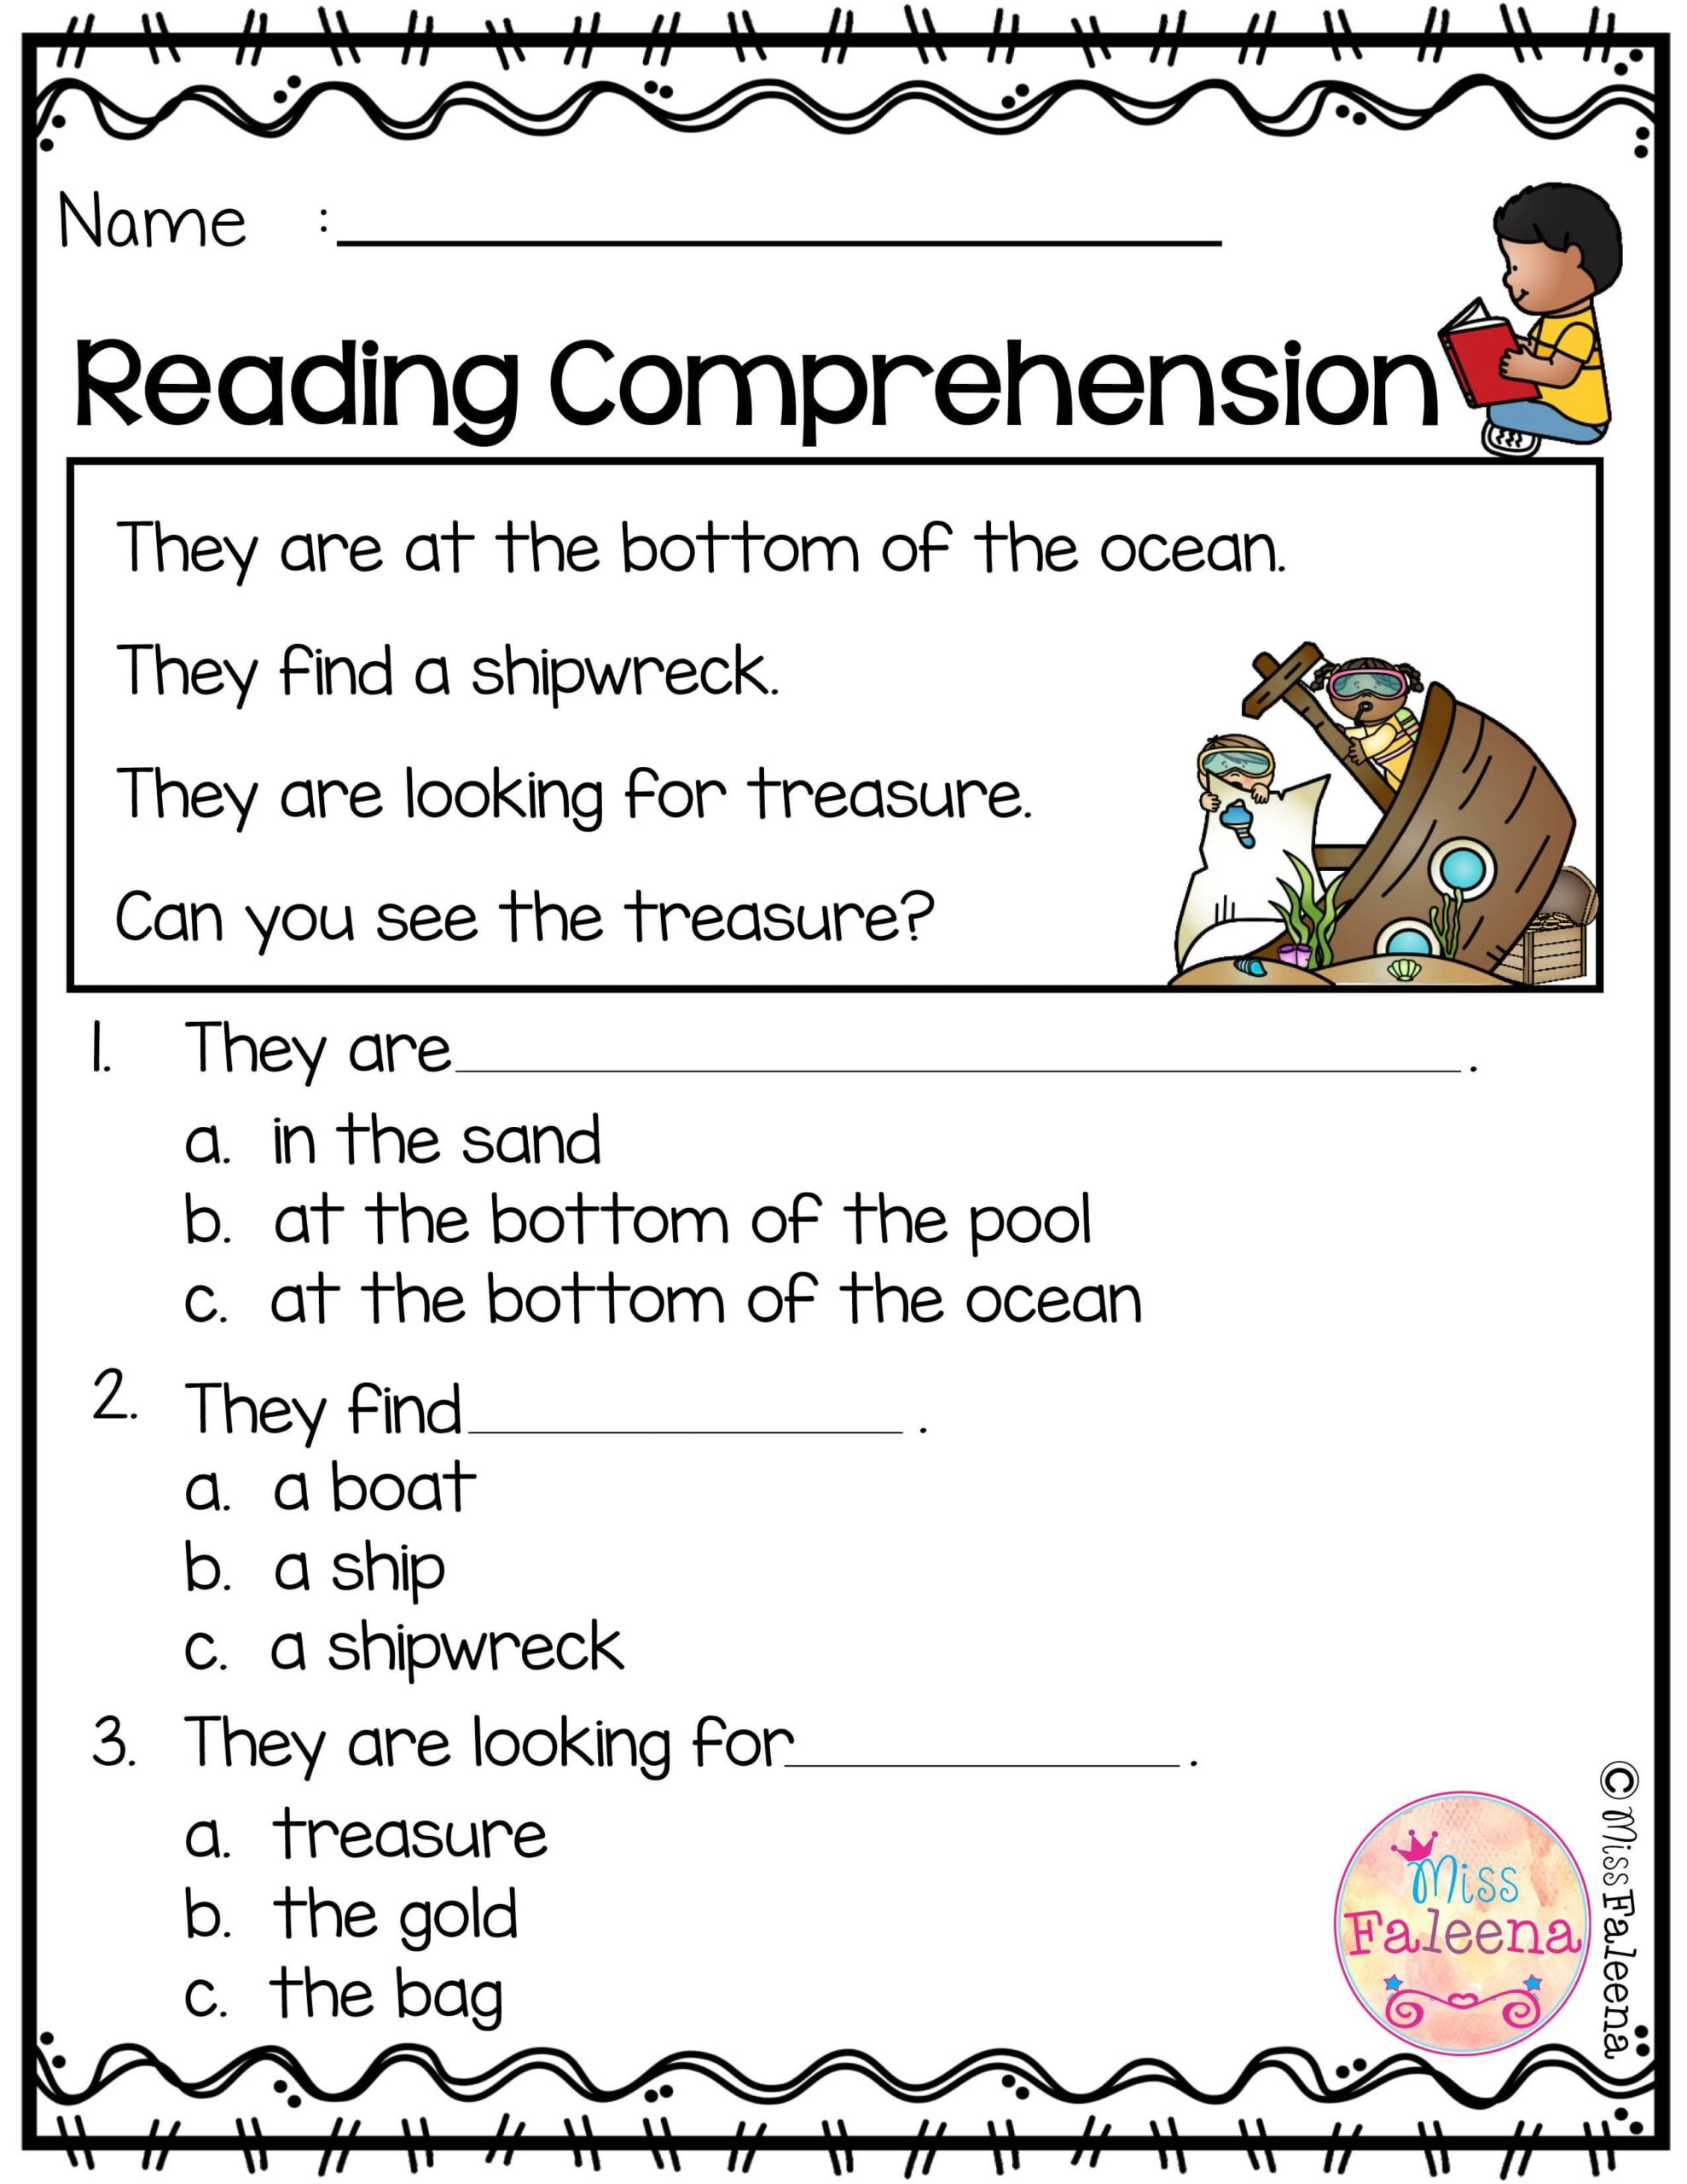 Free Printable Reading Comprehension Worksheets With Multiple Choice Questions